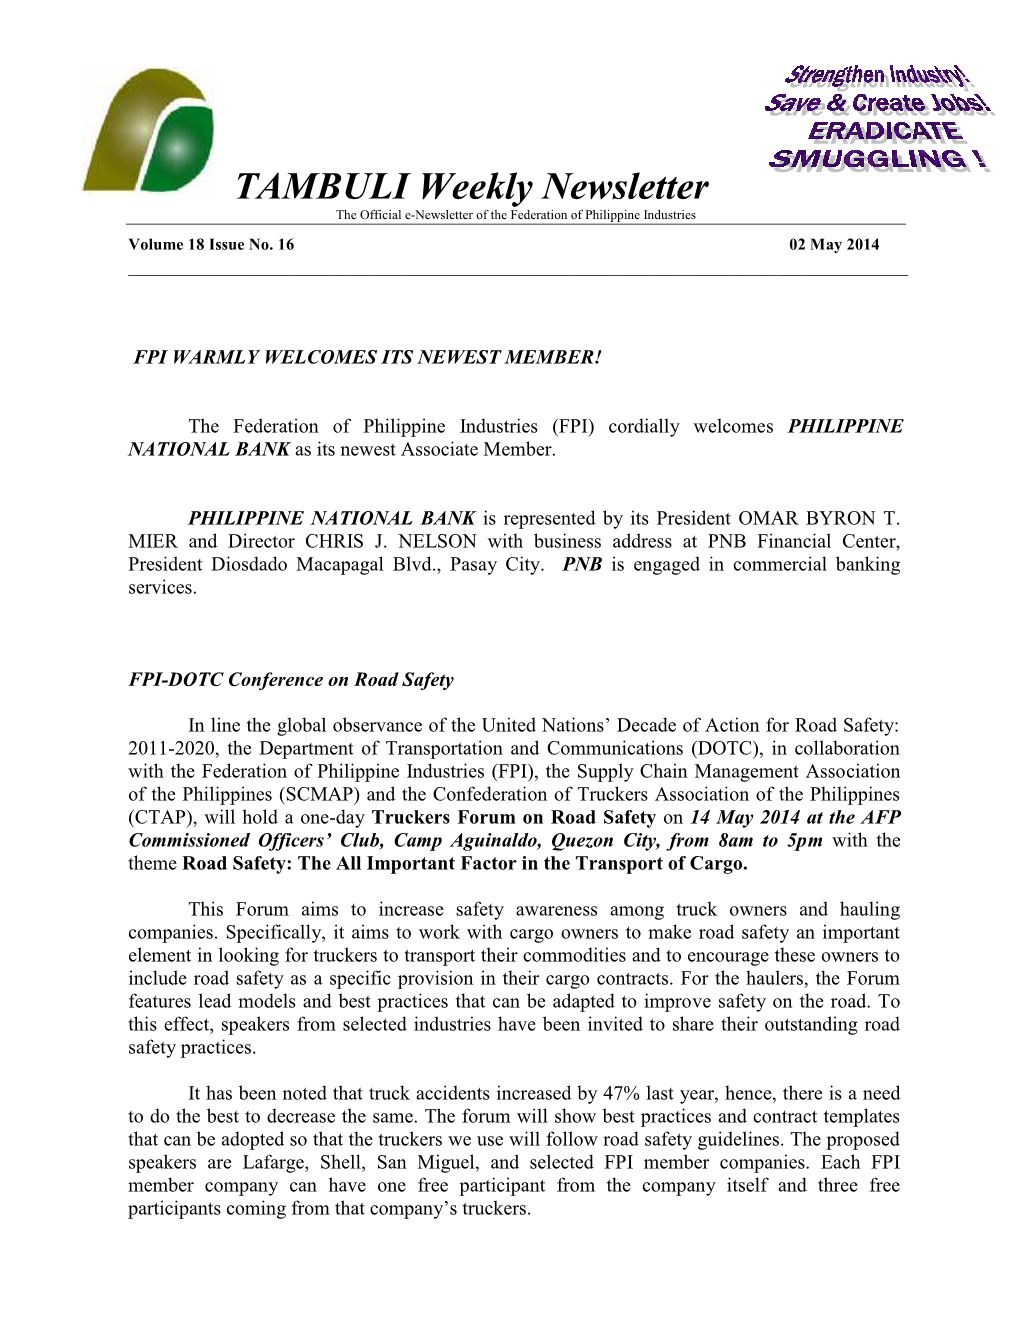 TAMBULI Weekly Newsletter the Official E-Newsletter of the Federation of Philippine Industries Volume 18 Issue No